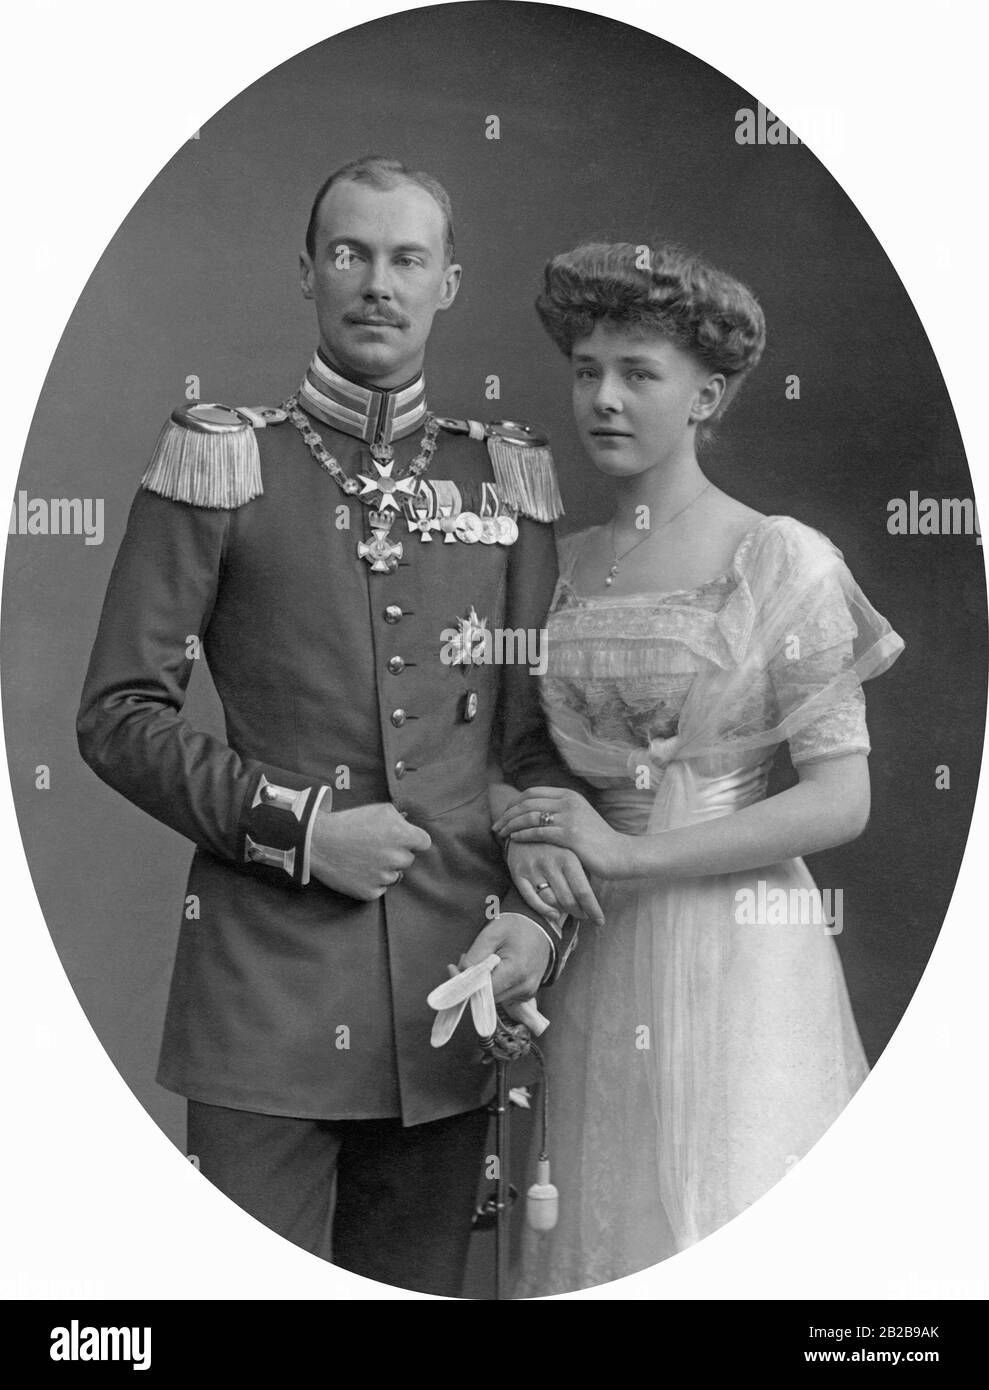 Prince Friedrich Wilhelm Viktor Karl Ernst Alexander Heinrich of Prussia and his wife Agatha zu Hohenlohe-Schillingsfuerst, Princess of Ratibor and Corvey. They got married in 1910 and had four children. Stock Photo